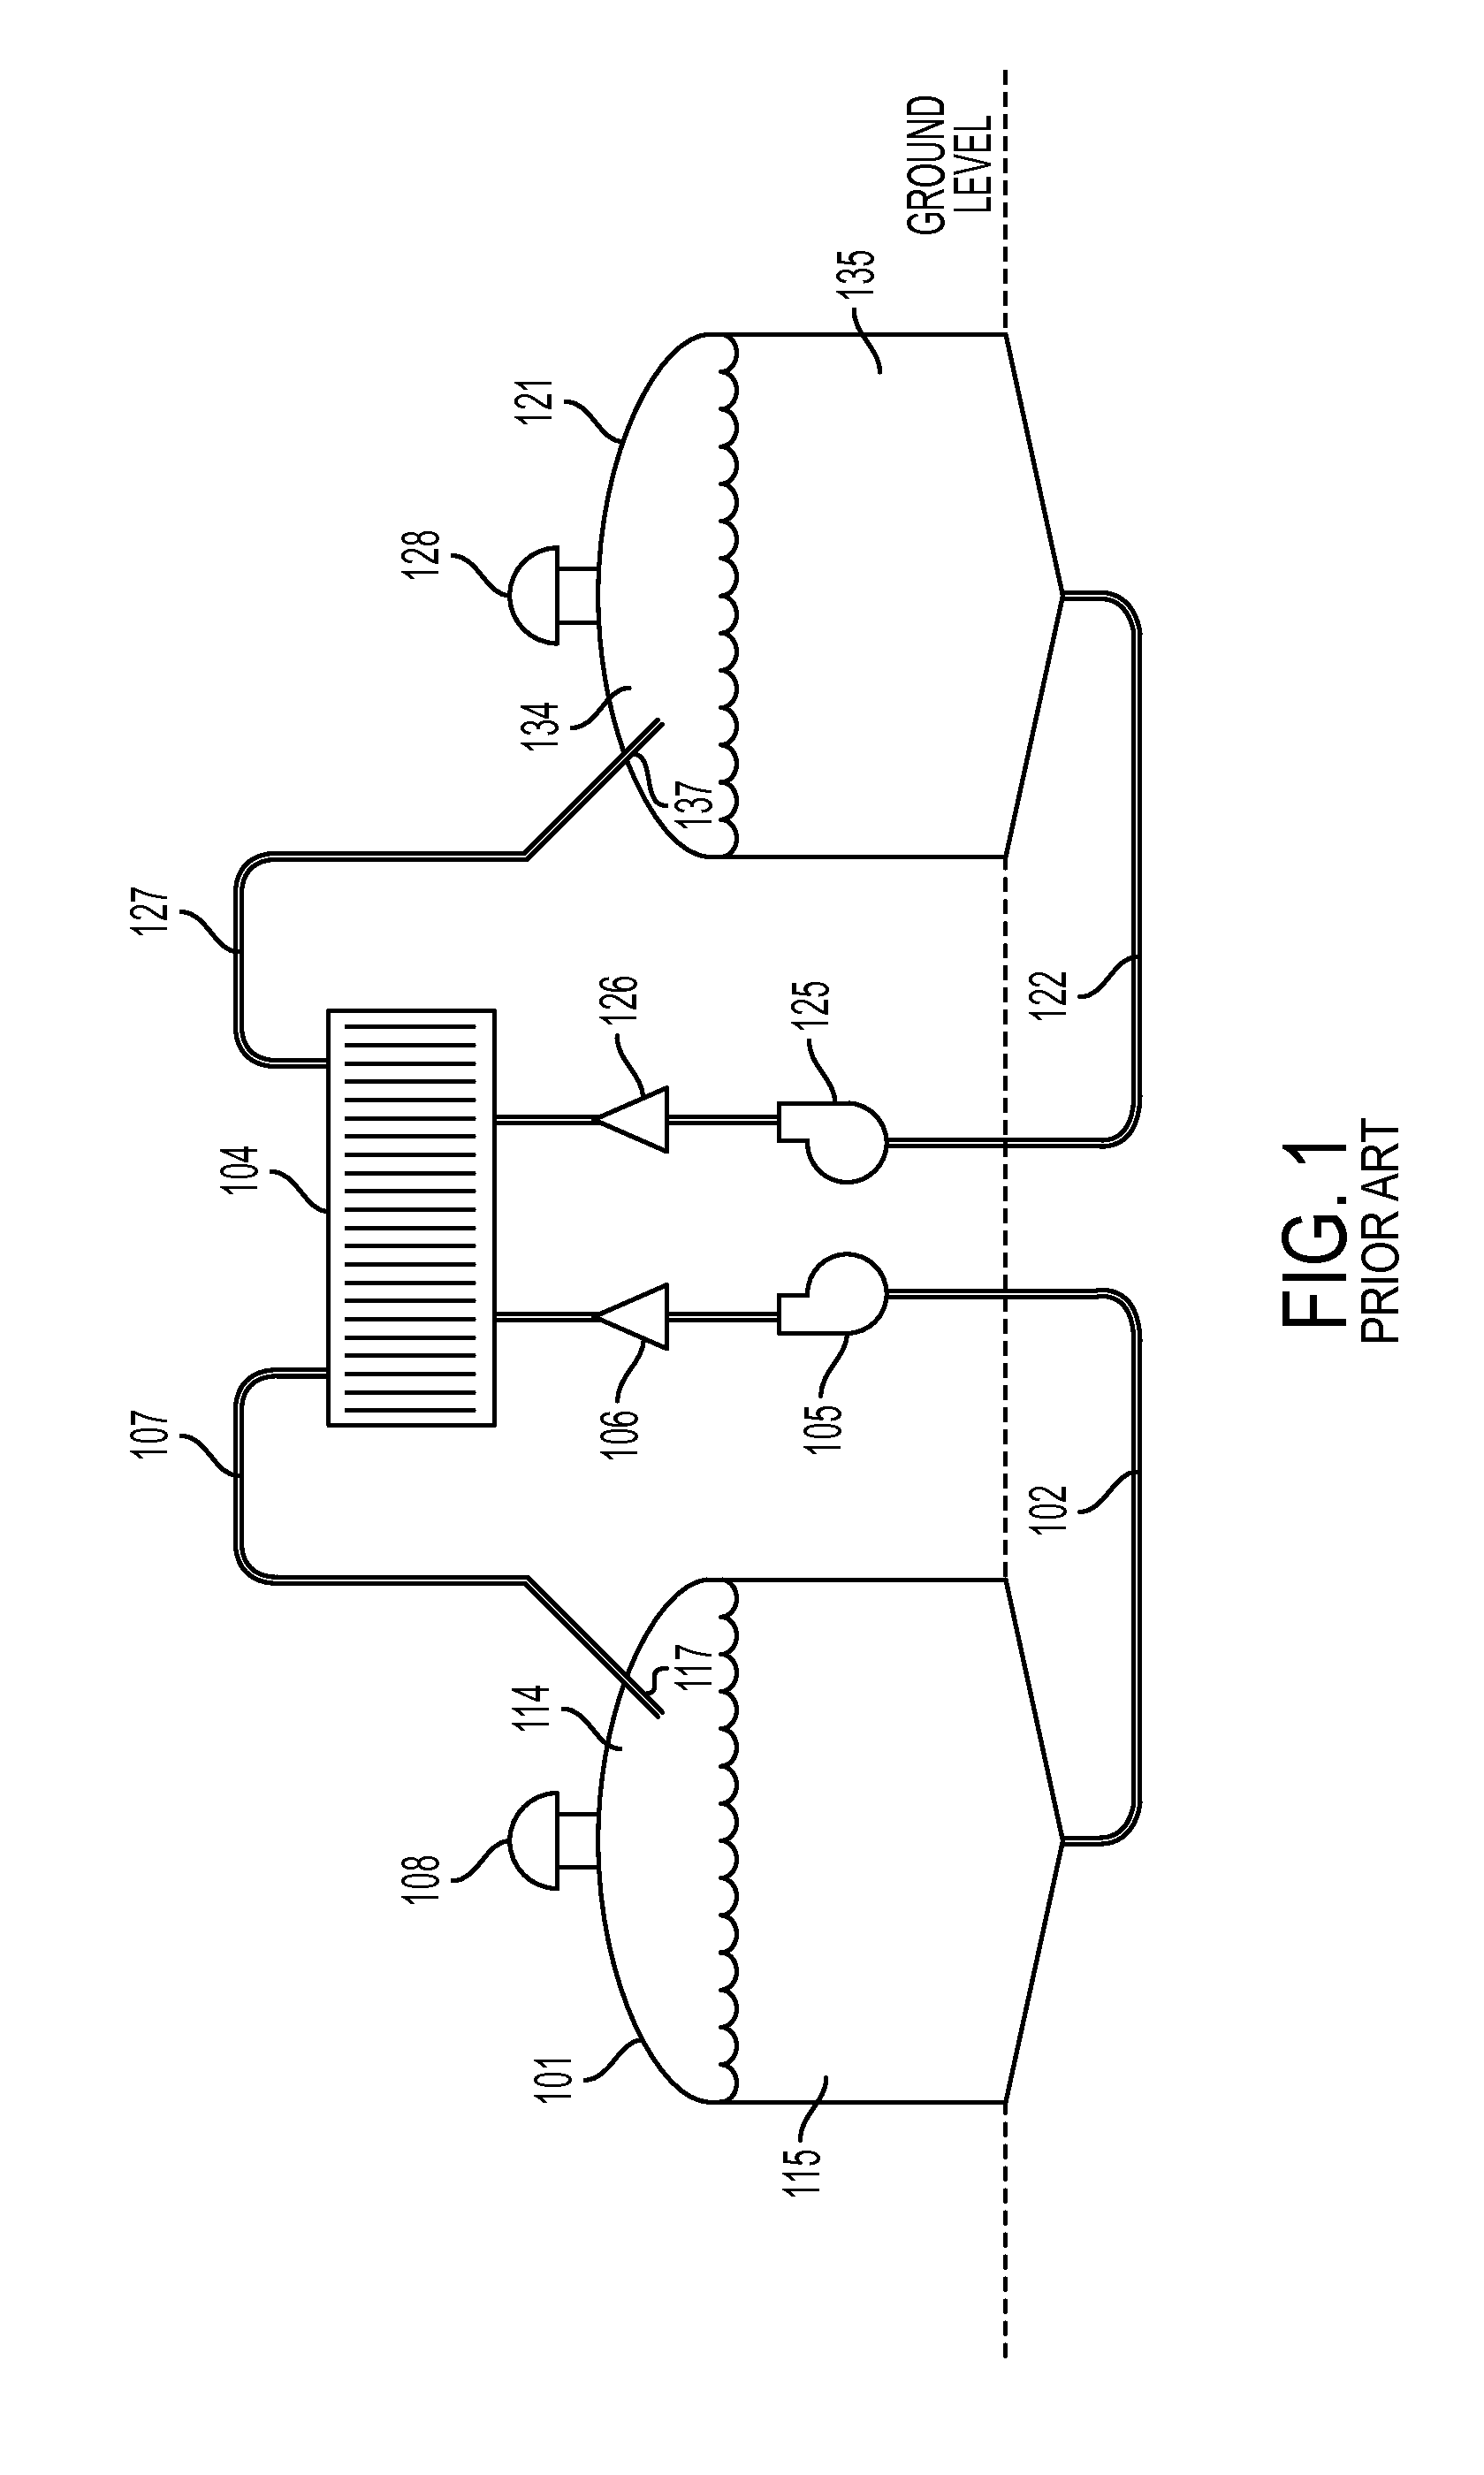 Pressure feed flow battery system and method